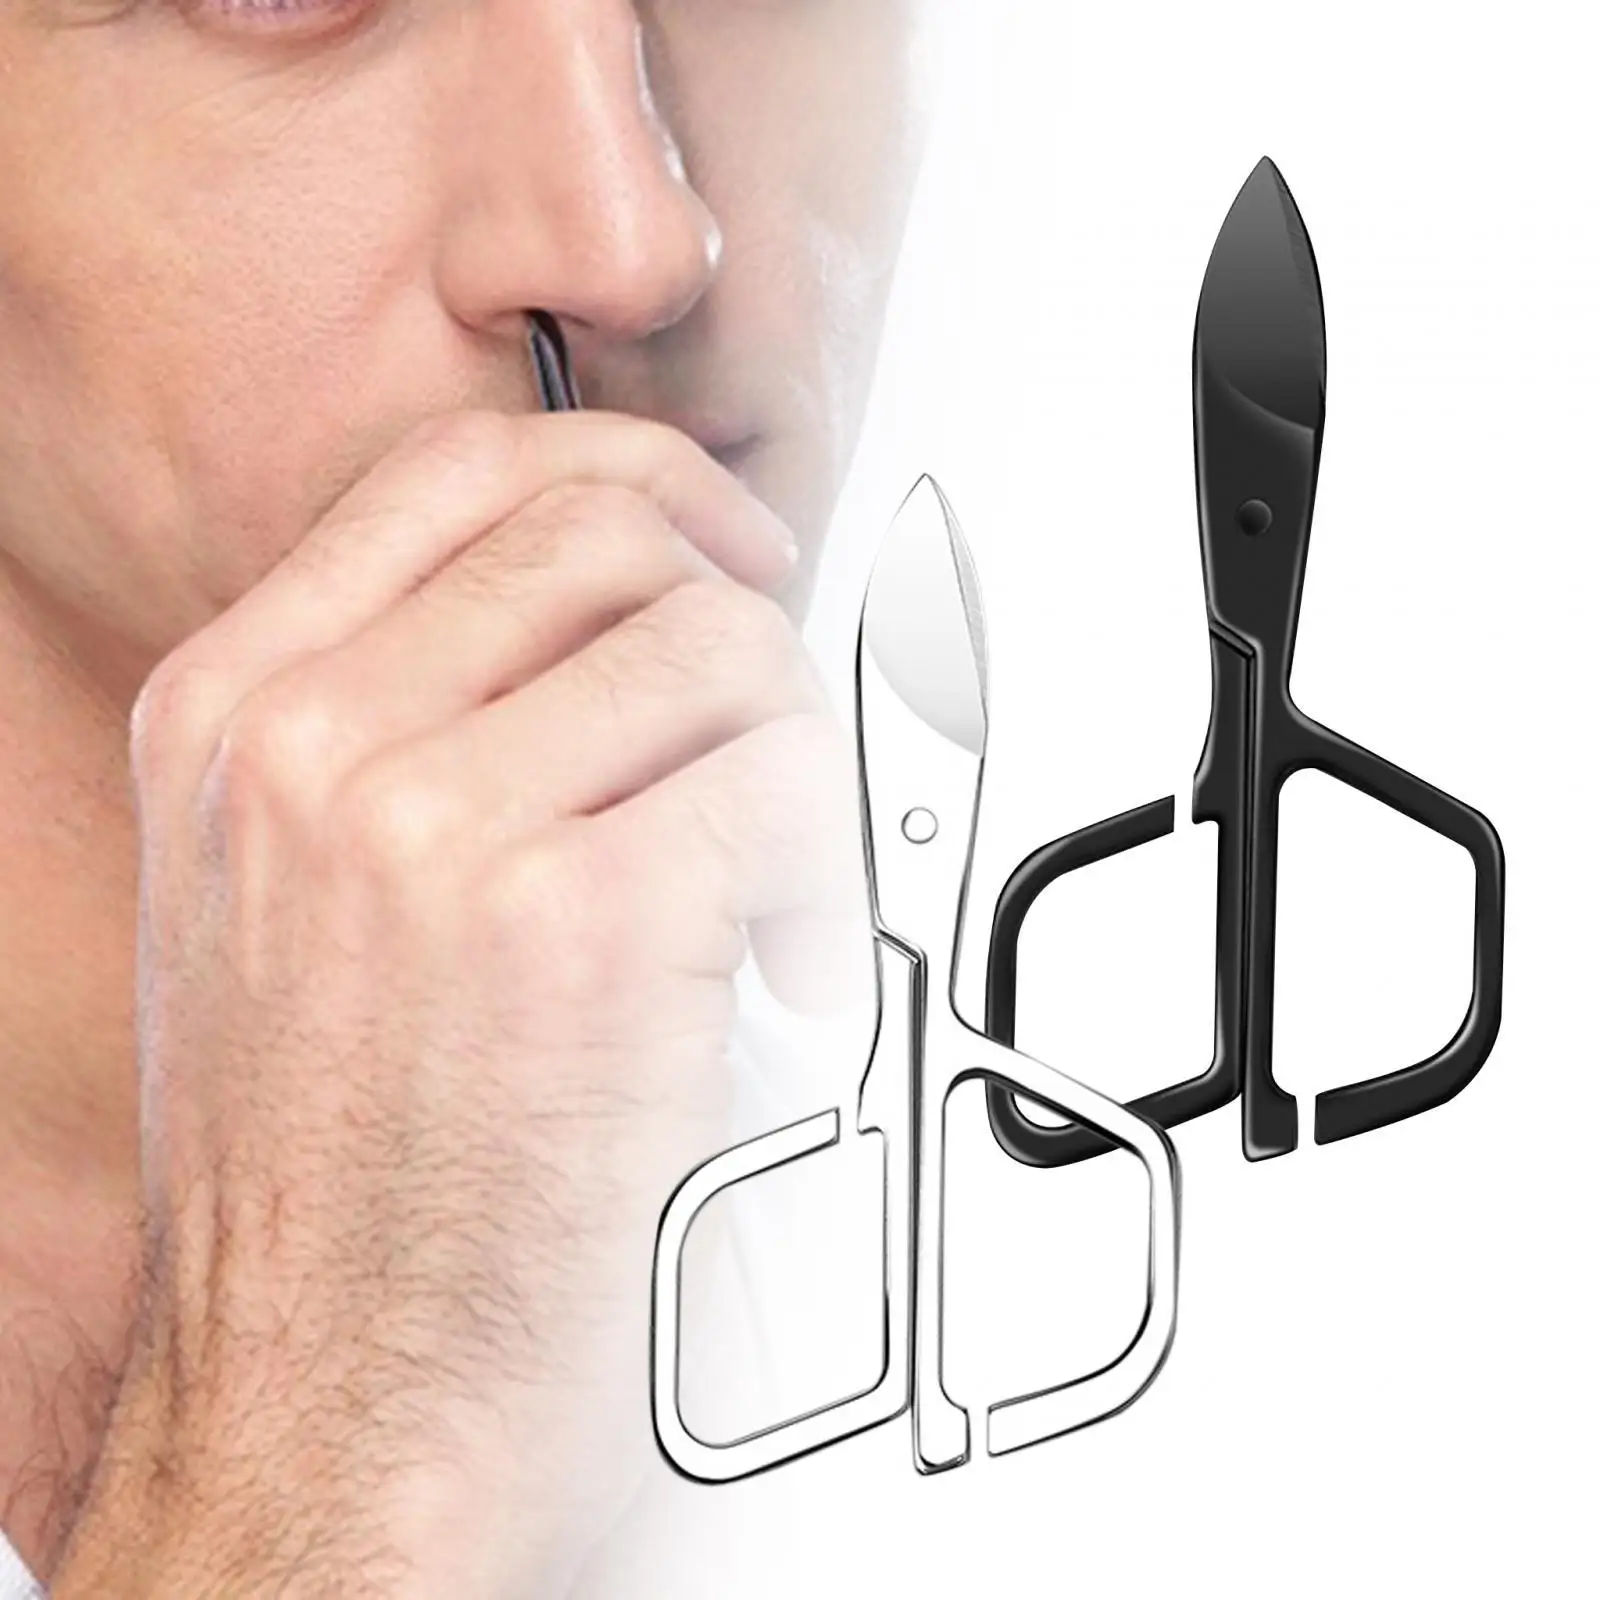 Nose Hair Scissors 9.4x4.7cm Practical Professional Grooming Scissors for Eyebrow Trimming Mustache Beard Ear Trimming Eyelashes